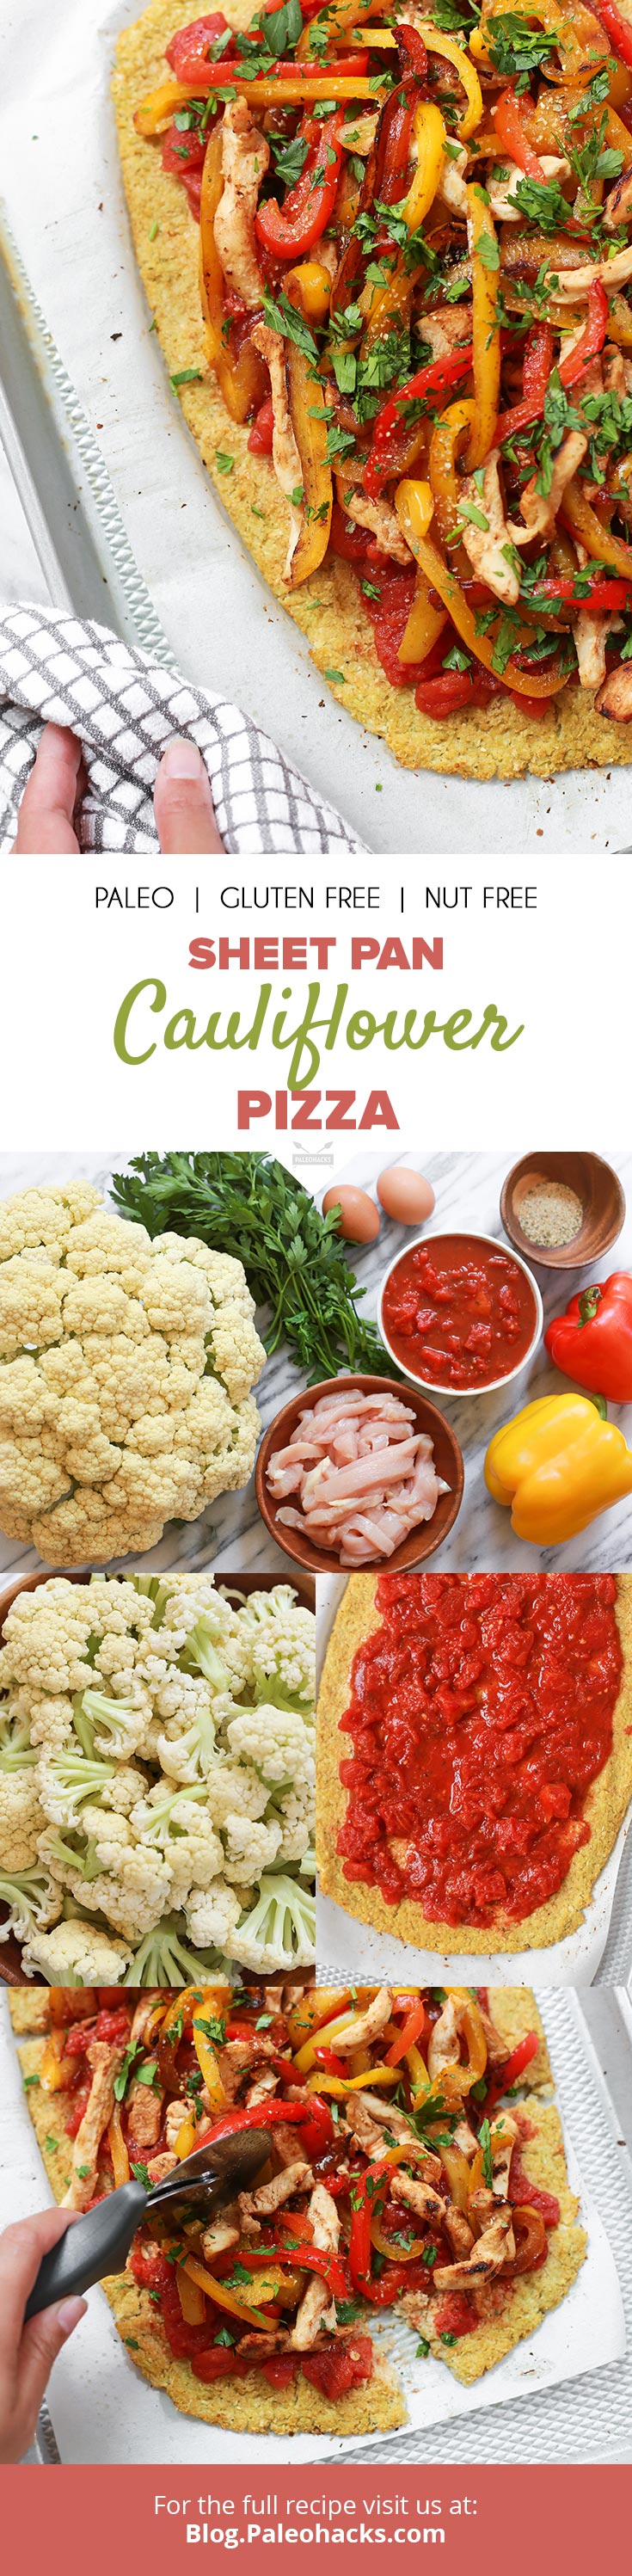 If you’re a fan of pizza but are not so keen on the gluten, then this Sheet Pan Cauliflower Pizza is your delicious solution!